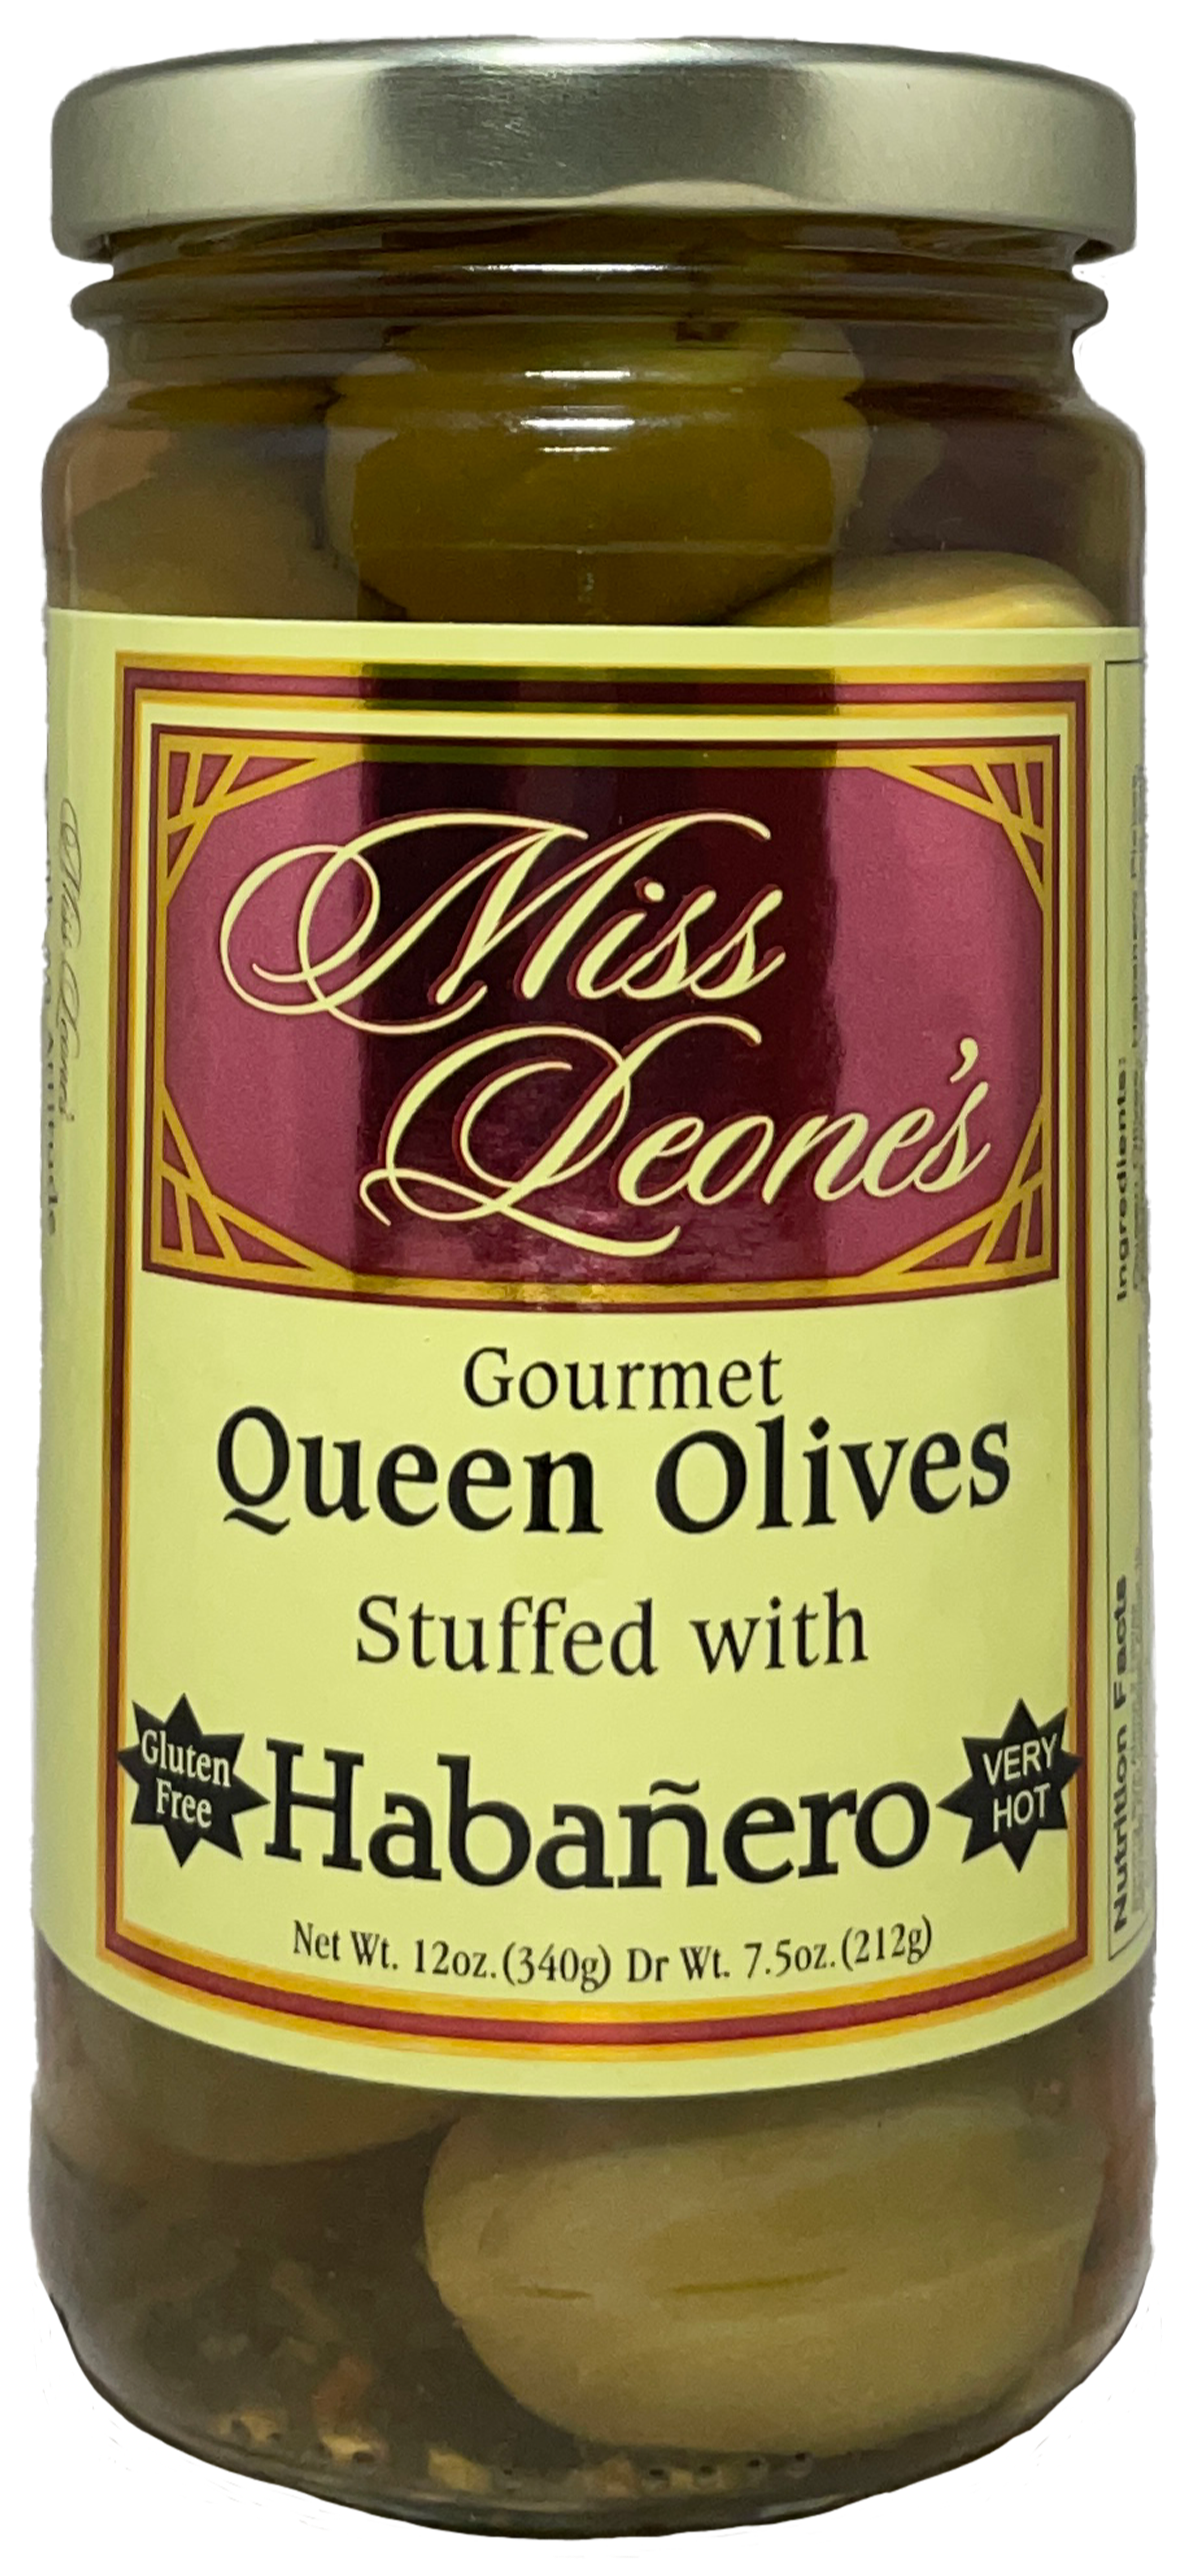 Habanero Pepper Stuffed Queen Olives *NEW LOWER PRICE*